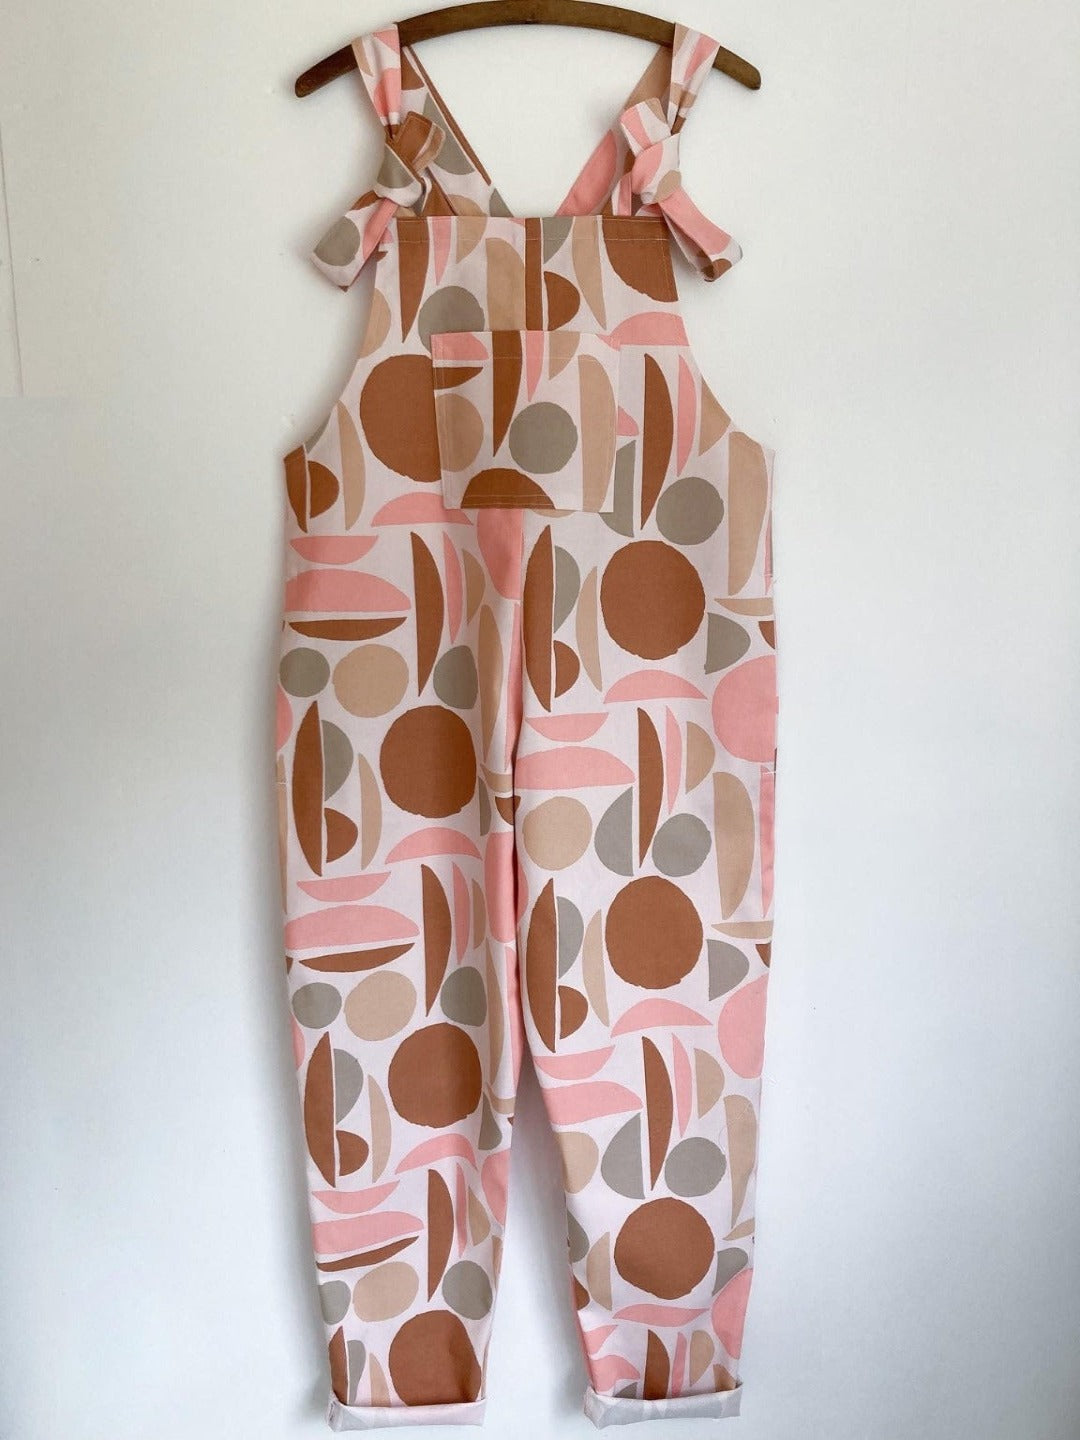 Cotton dungarees with pink and beige geometric shapes